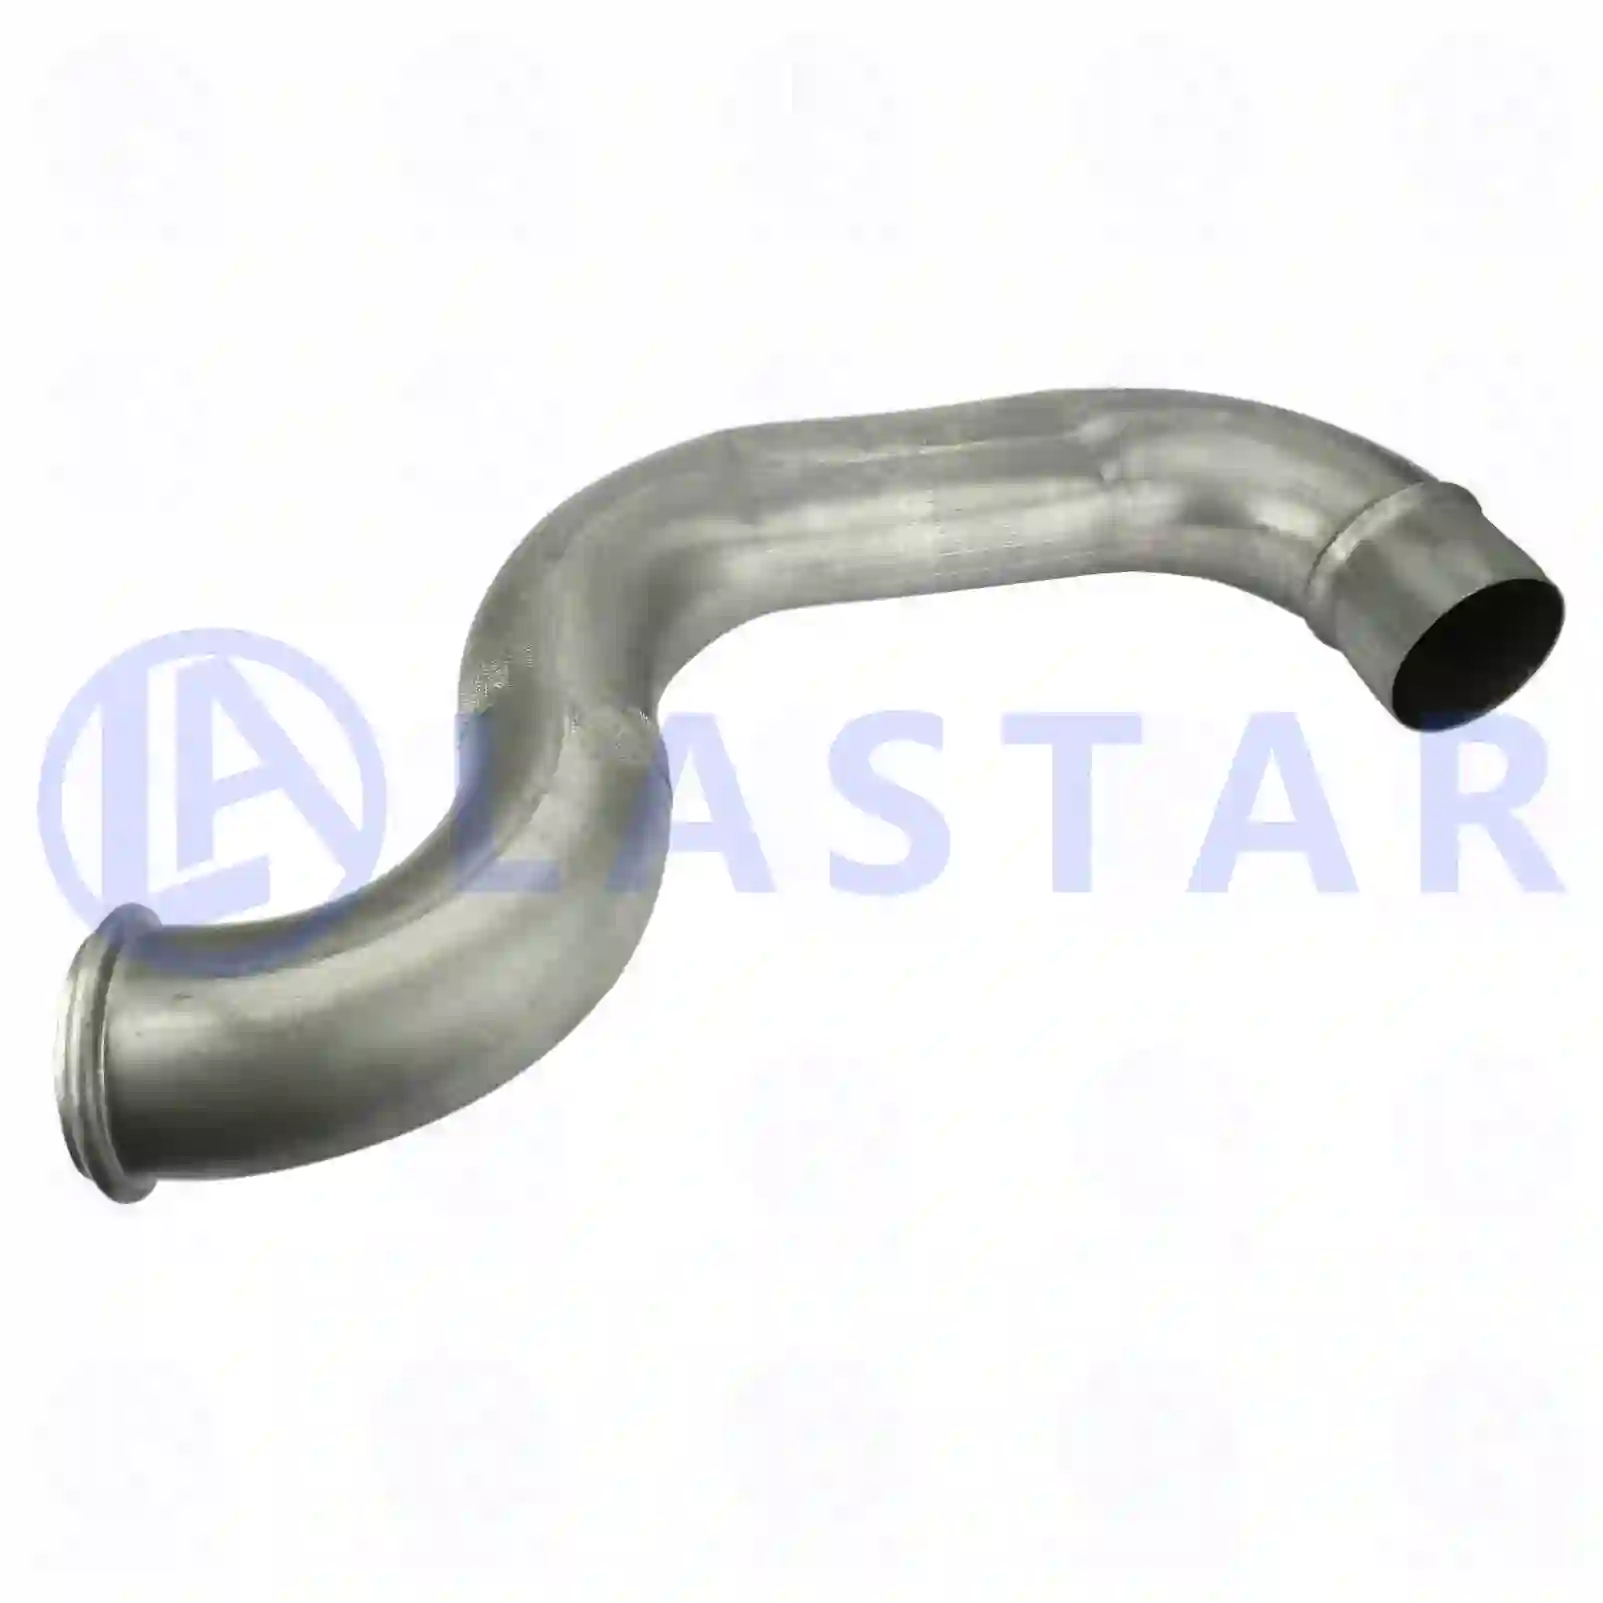 Exhaust pipe, 77706838, 1629055 ||  77706838 Lastar Spare Part | Truck Spare Parts, Auotomotive Spare Parts Exhaust pipe, 77706838, 1629055 ||  77706838 Lastar Spare Part | Truck Spare Parts, Auotomotive Spare Parts